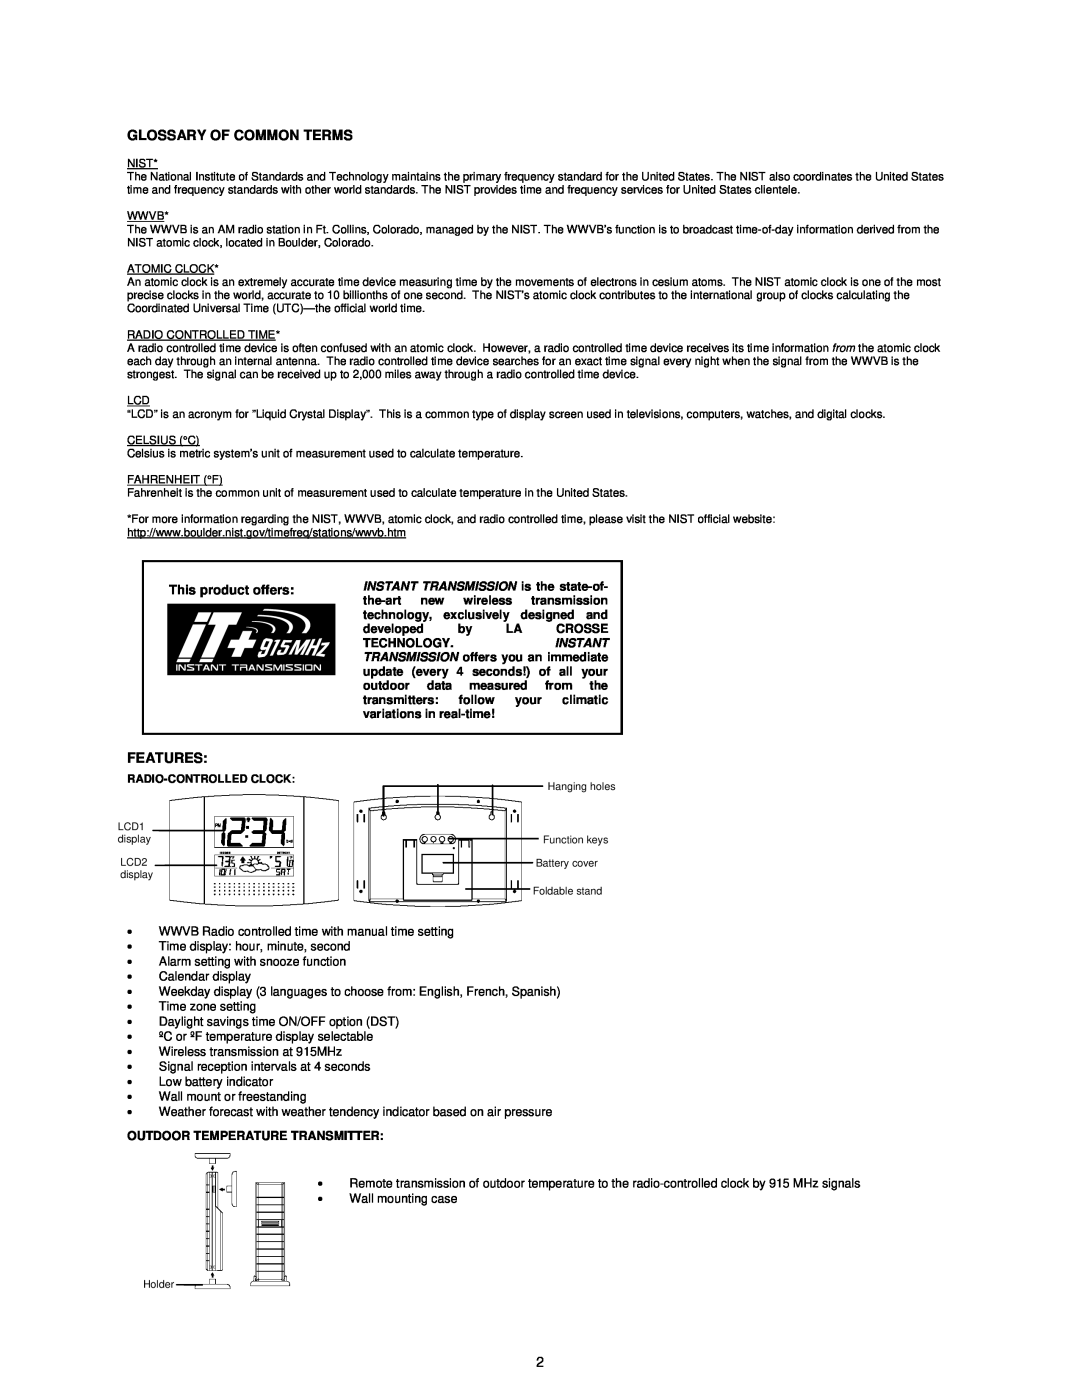 La Crosse Technology WS-8157U-IT instruction manual Glossary Of Common Terms, Features, This product offers 